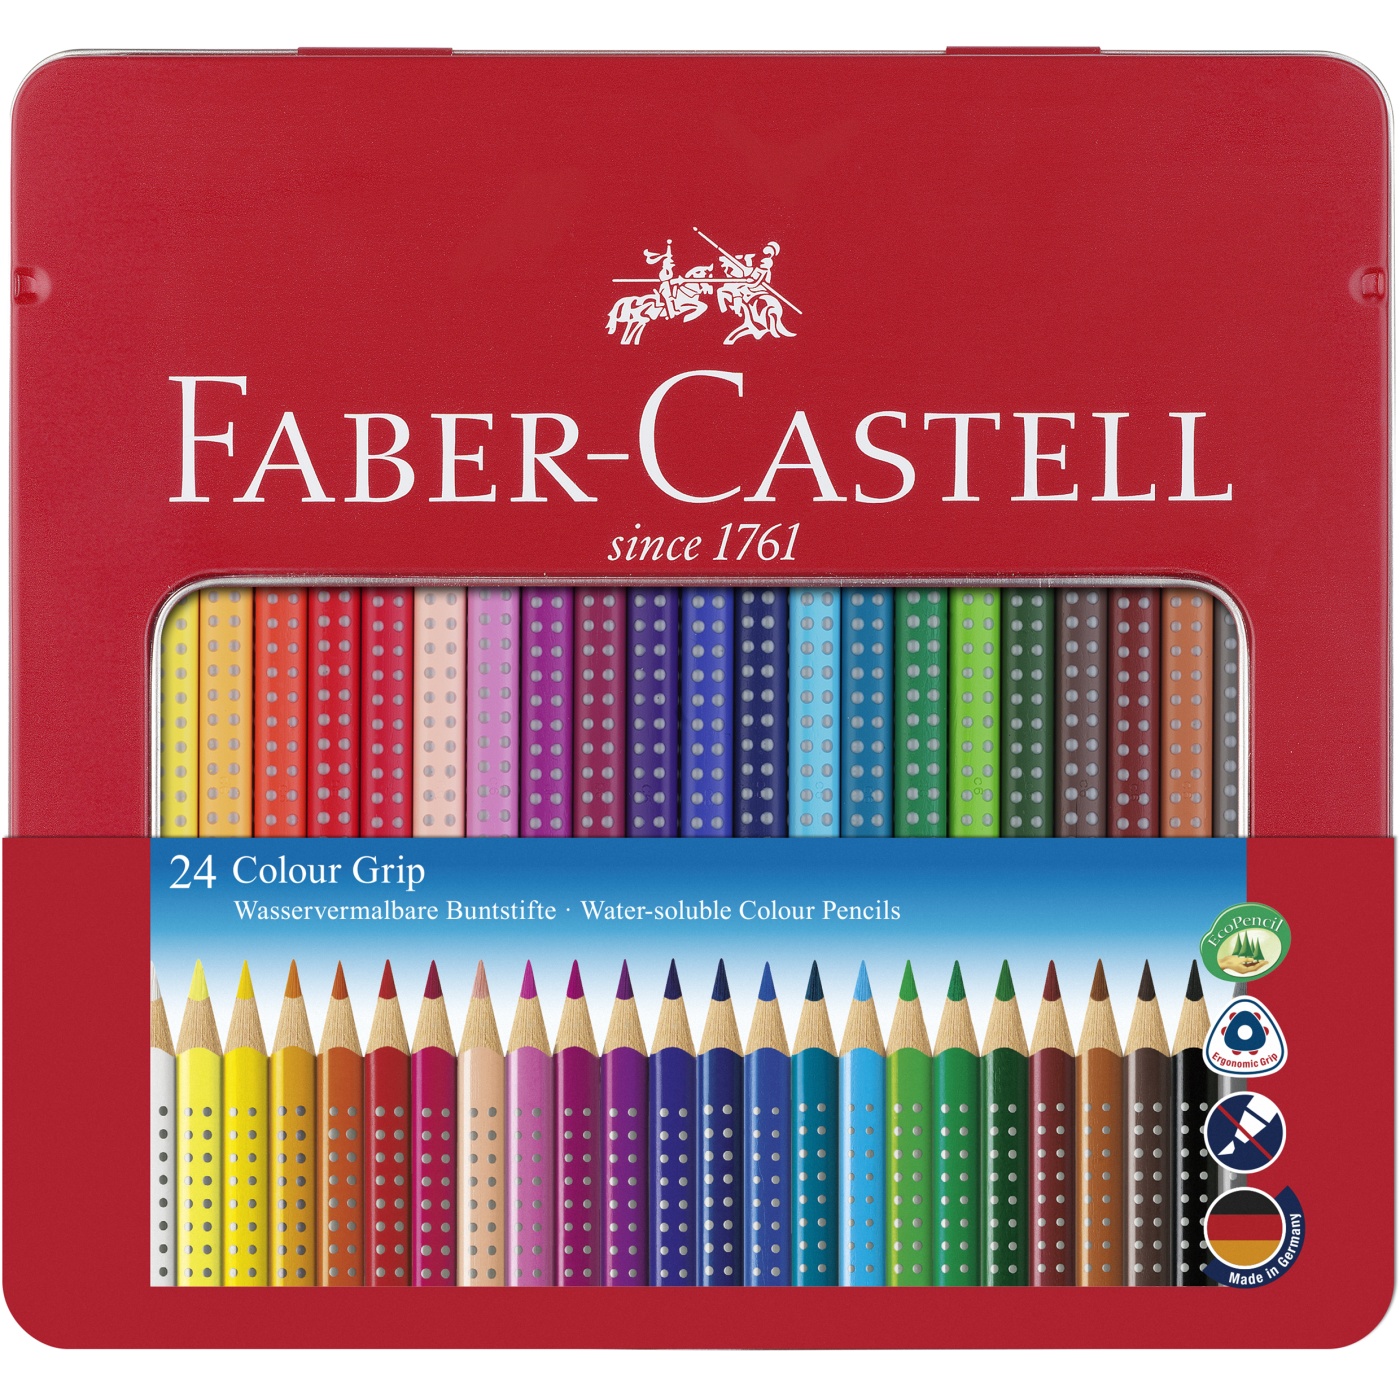 Faber-castell Polychromos Artists' Color Pencils - Tin Of 24 36 60 Colors -  Premium Quality Artist Pencils,easy To Blend - Wooden Colored Pencils -  AliExpress